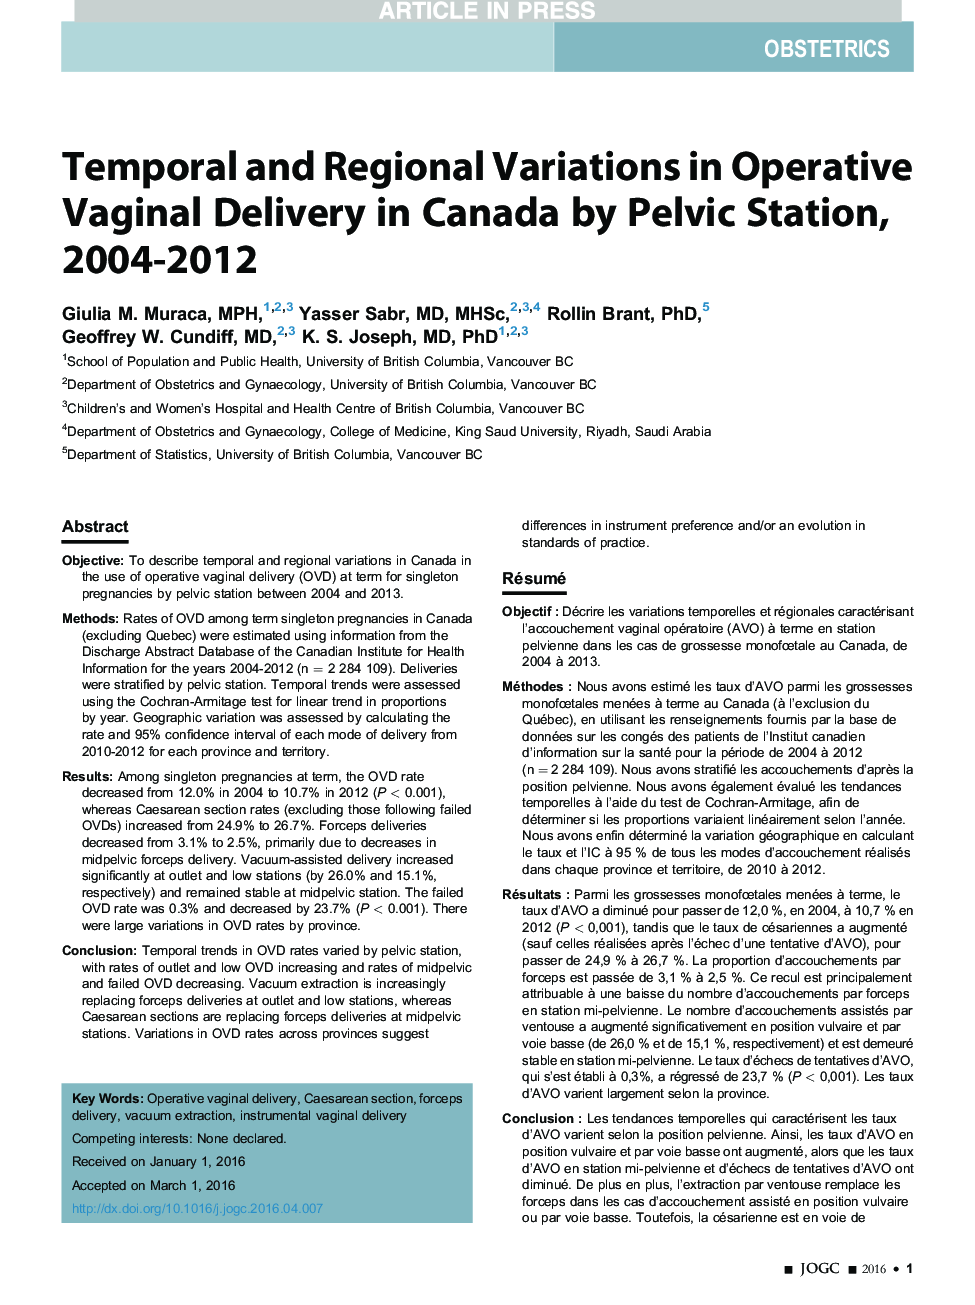 Temporal and Regional Variations in Operative Vaginal Delivery in Canada by Pelvic Station, 2004-2012